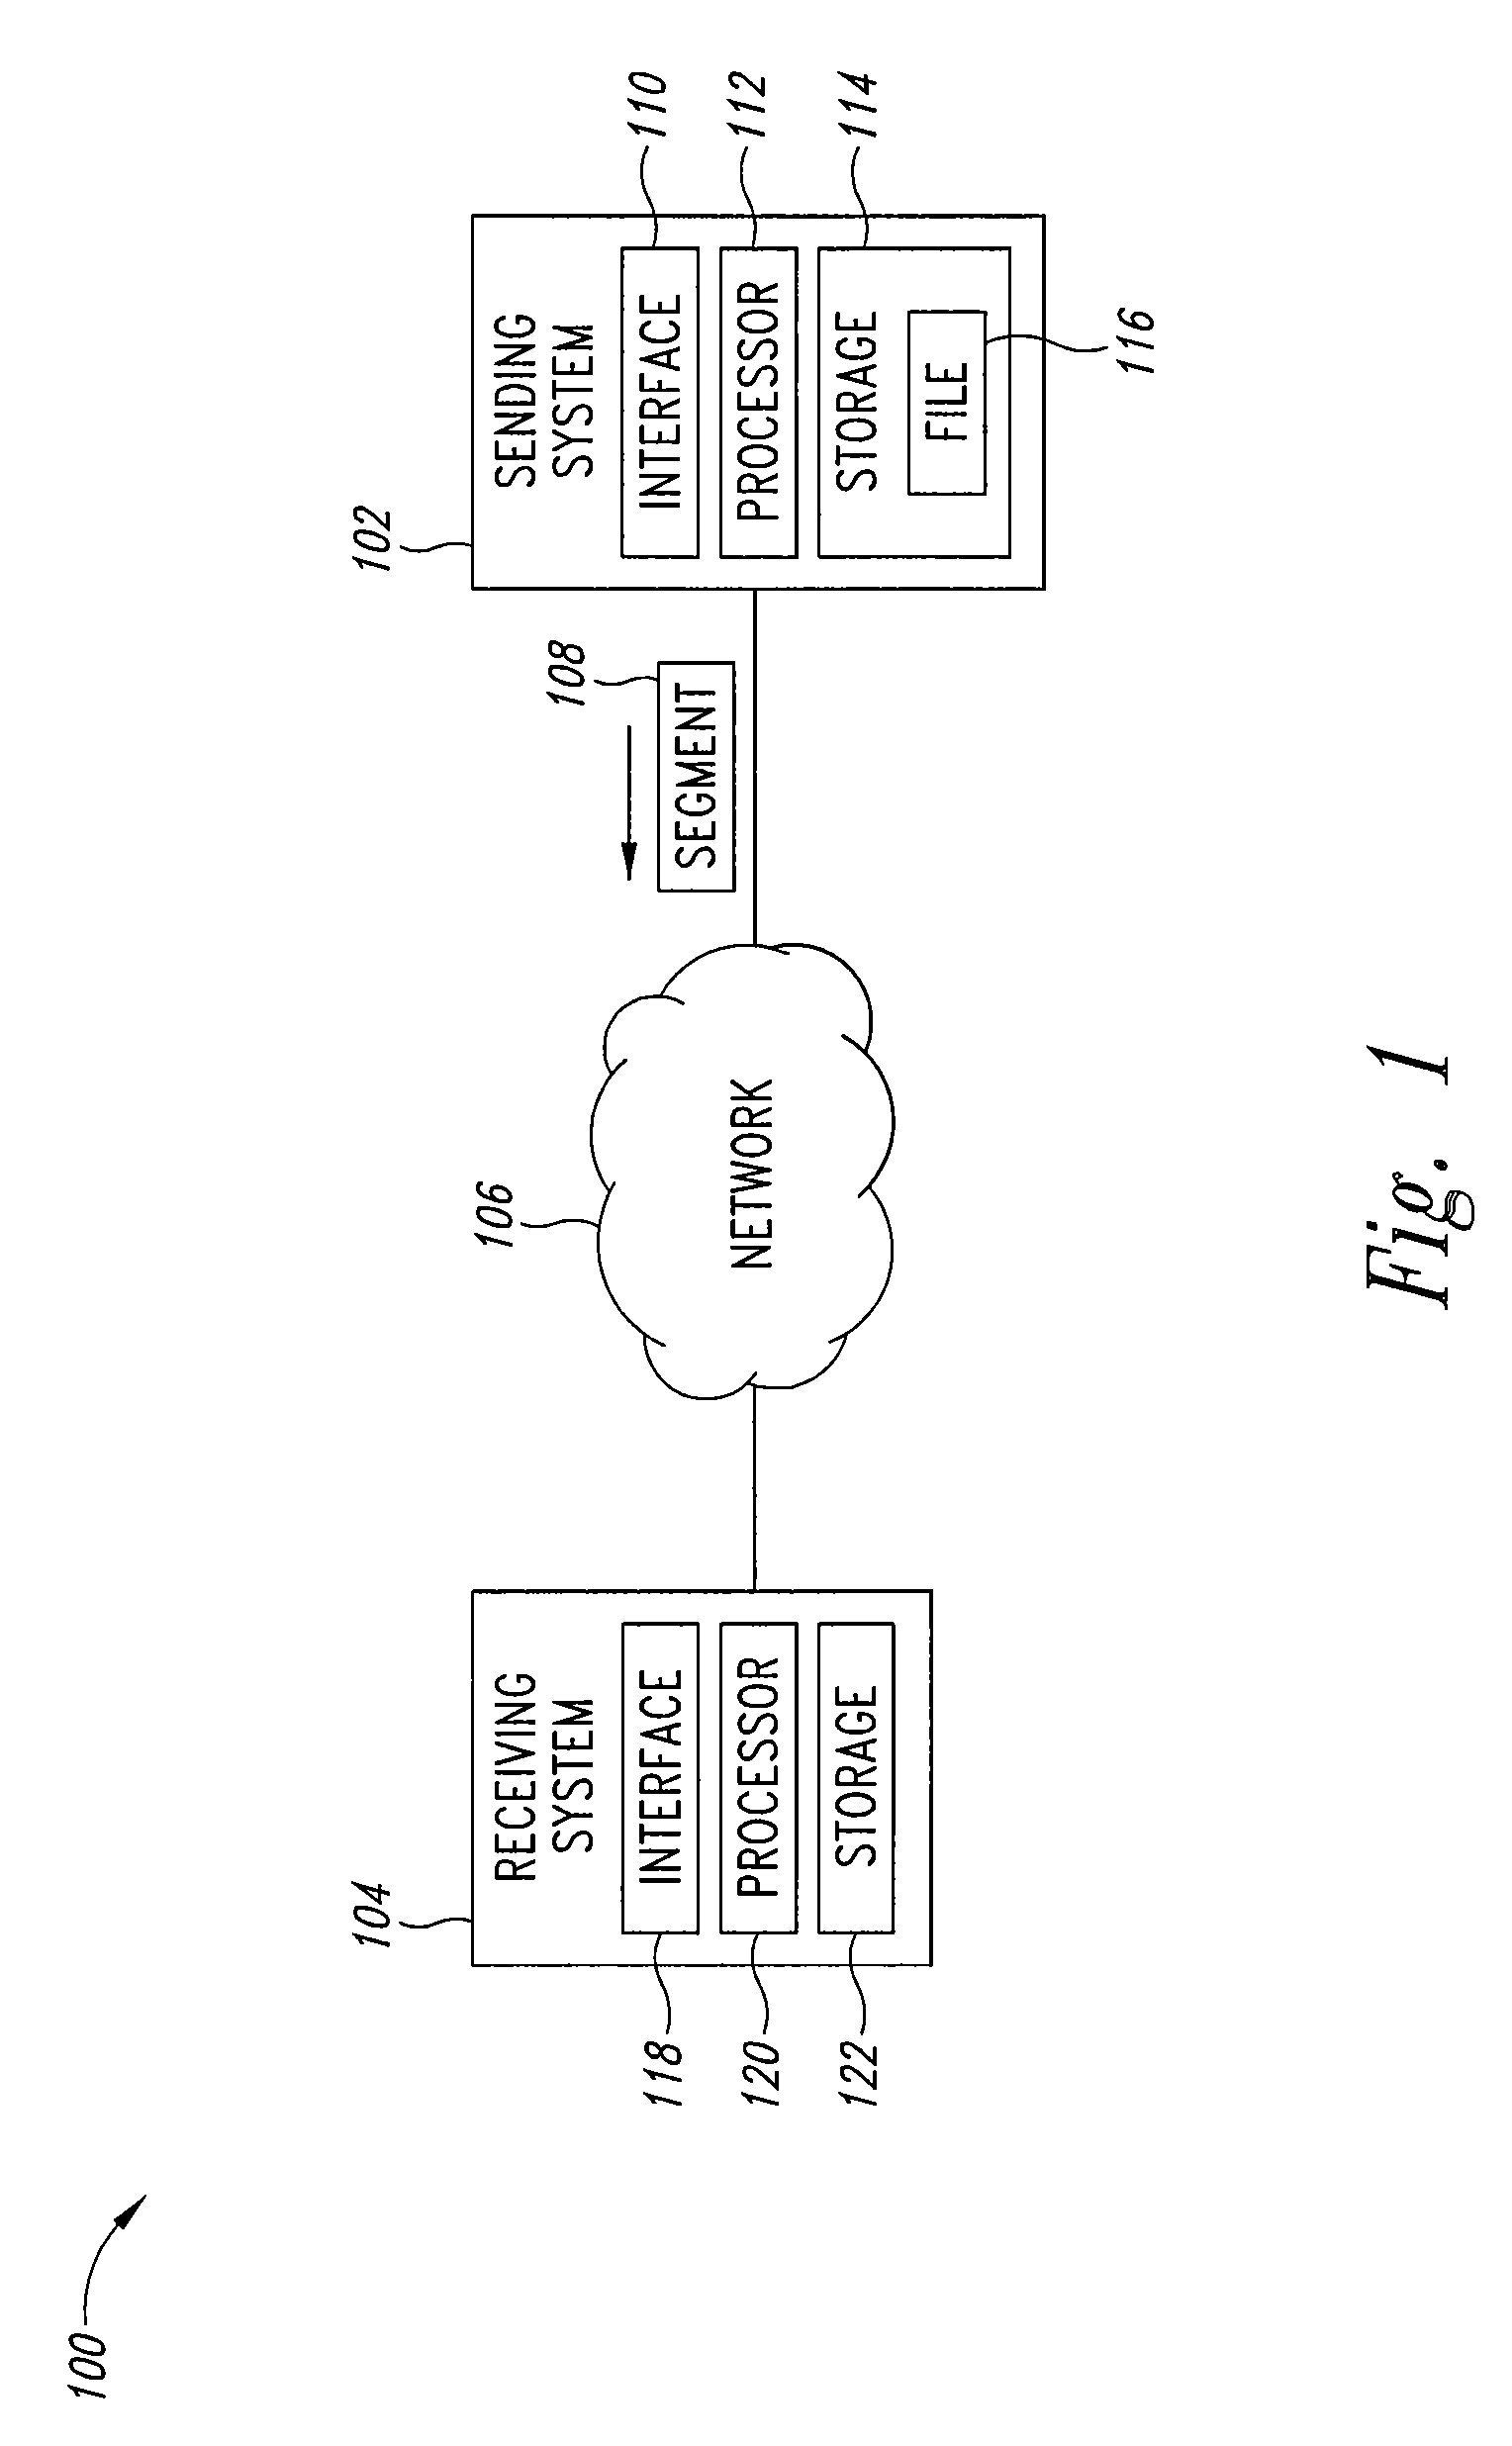 Adaptive file delivery system and method